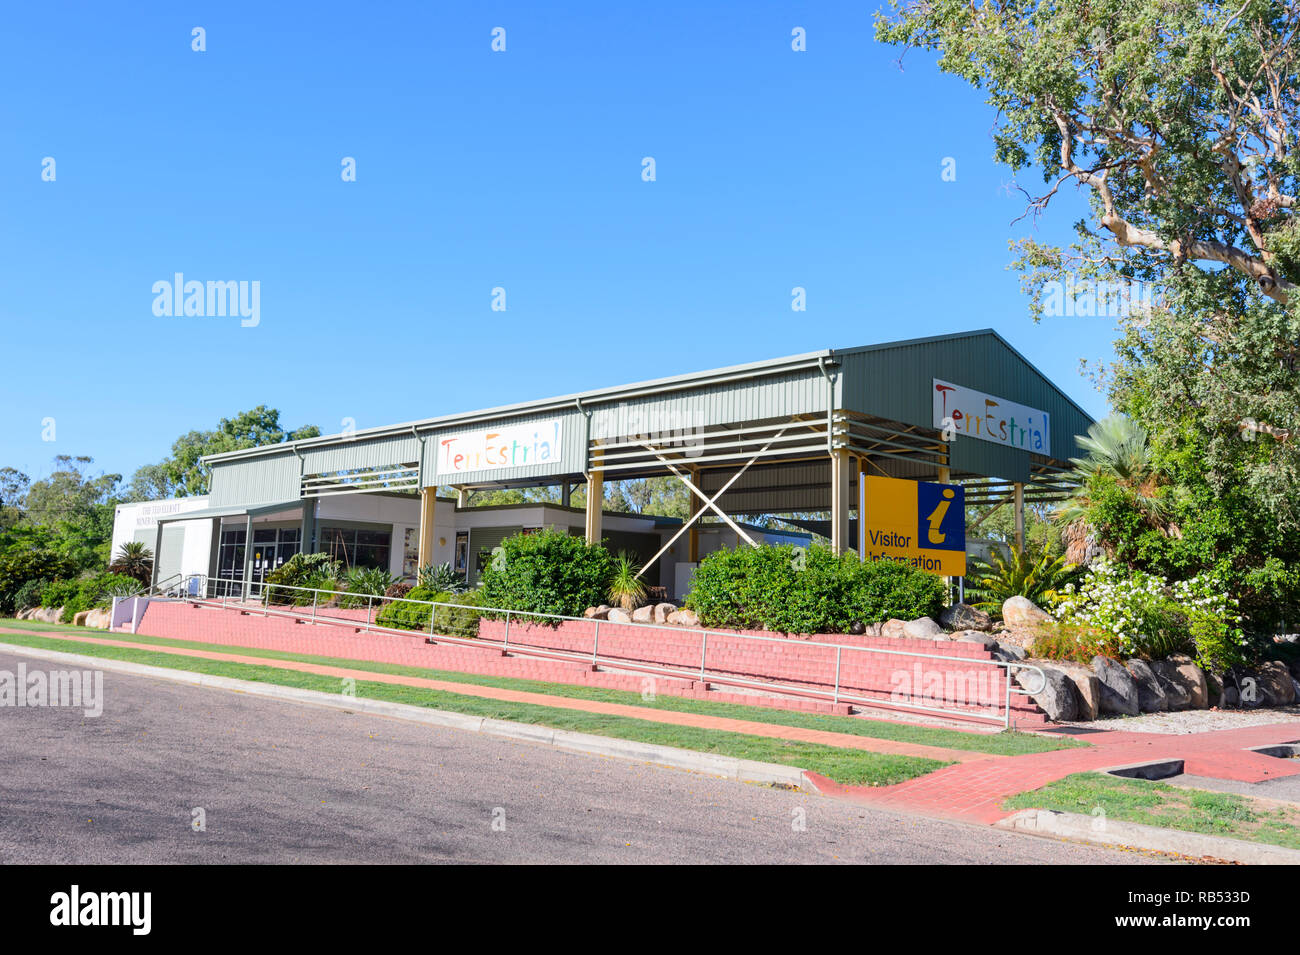 'TerrEstrial' Visitor Information Centre in Georgetown, a small rural town along the Savannah Way, Queensland, QLD, Australia Stock Photo